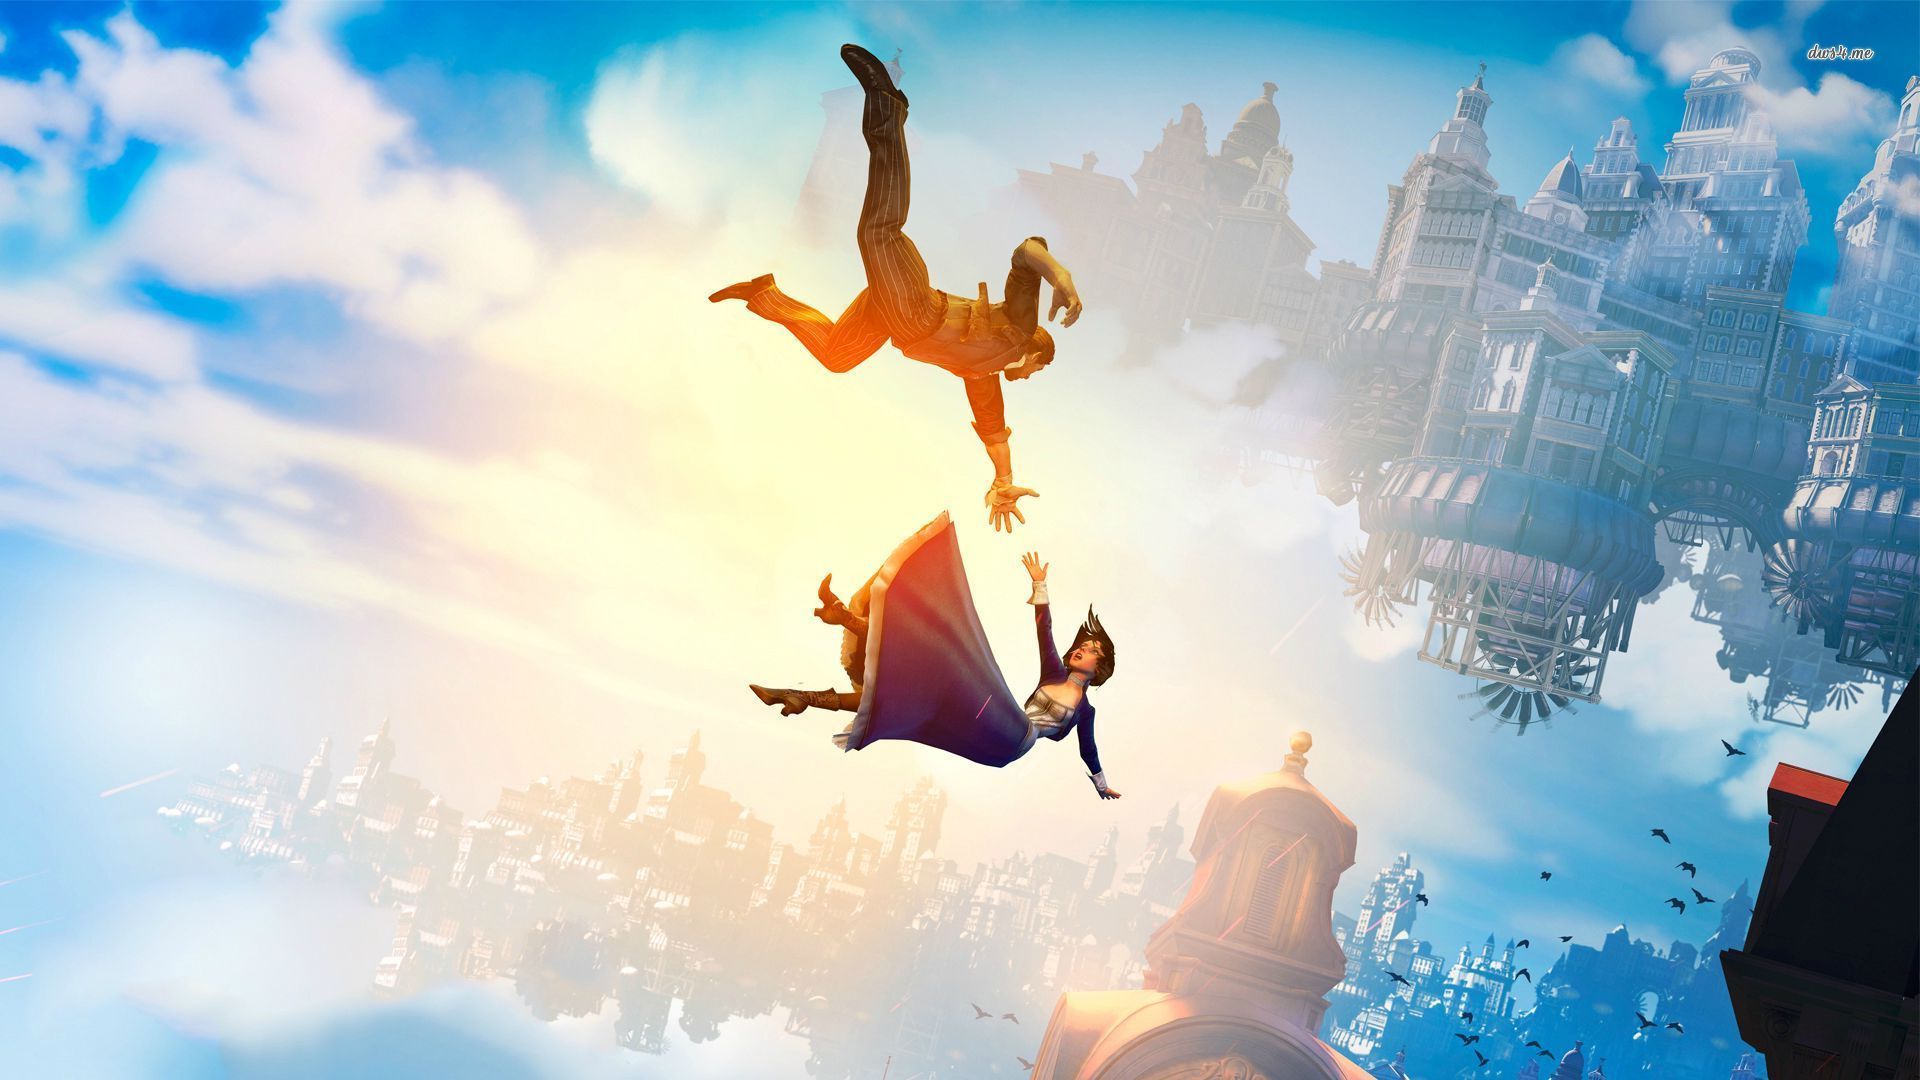 Booker trying to catch Elizabeth while both are falling from Colubmia - BioShock Infinite Key Concept Artwork